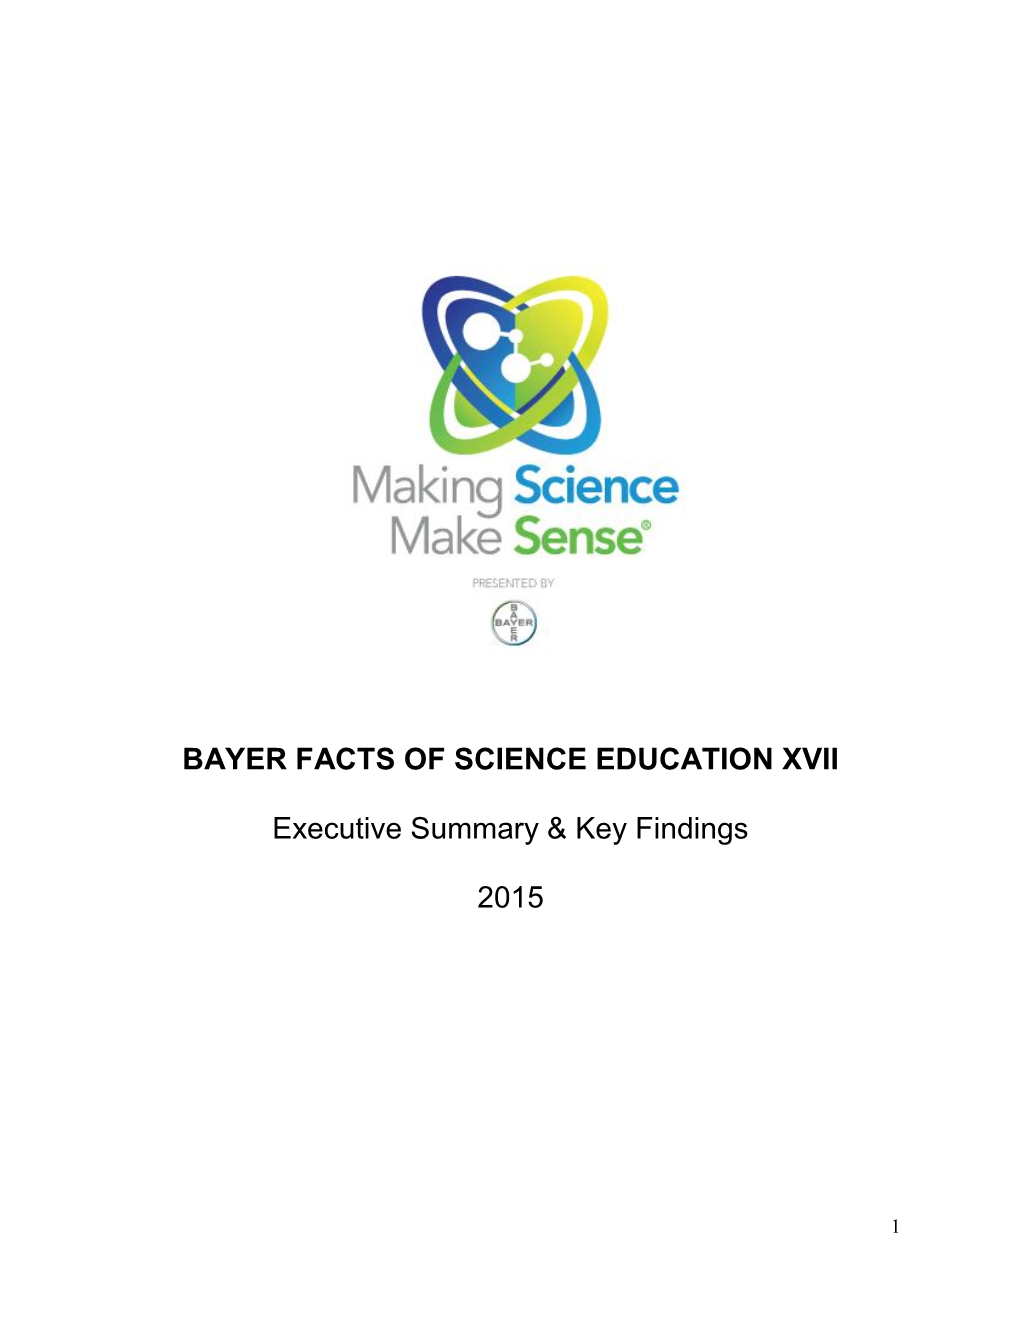 Bayer Facts of Science Education: Executive Summary & Key Findings